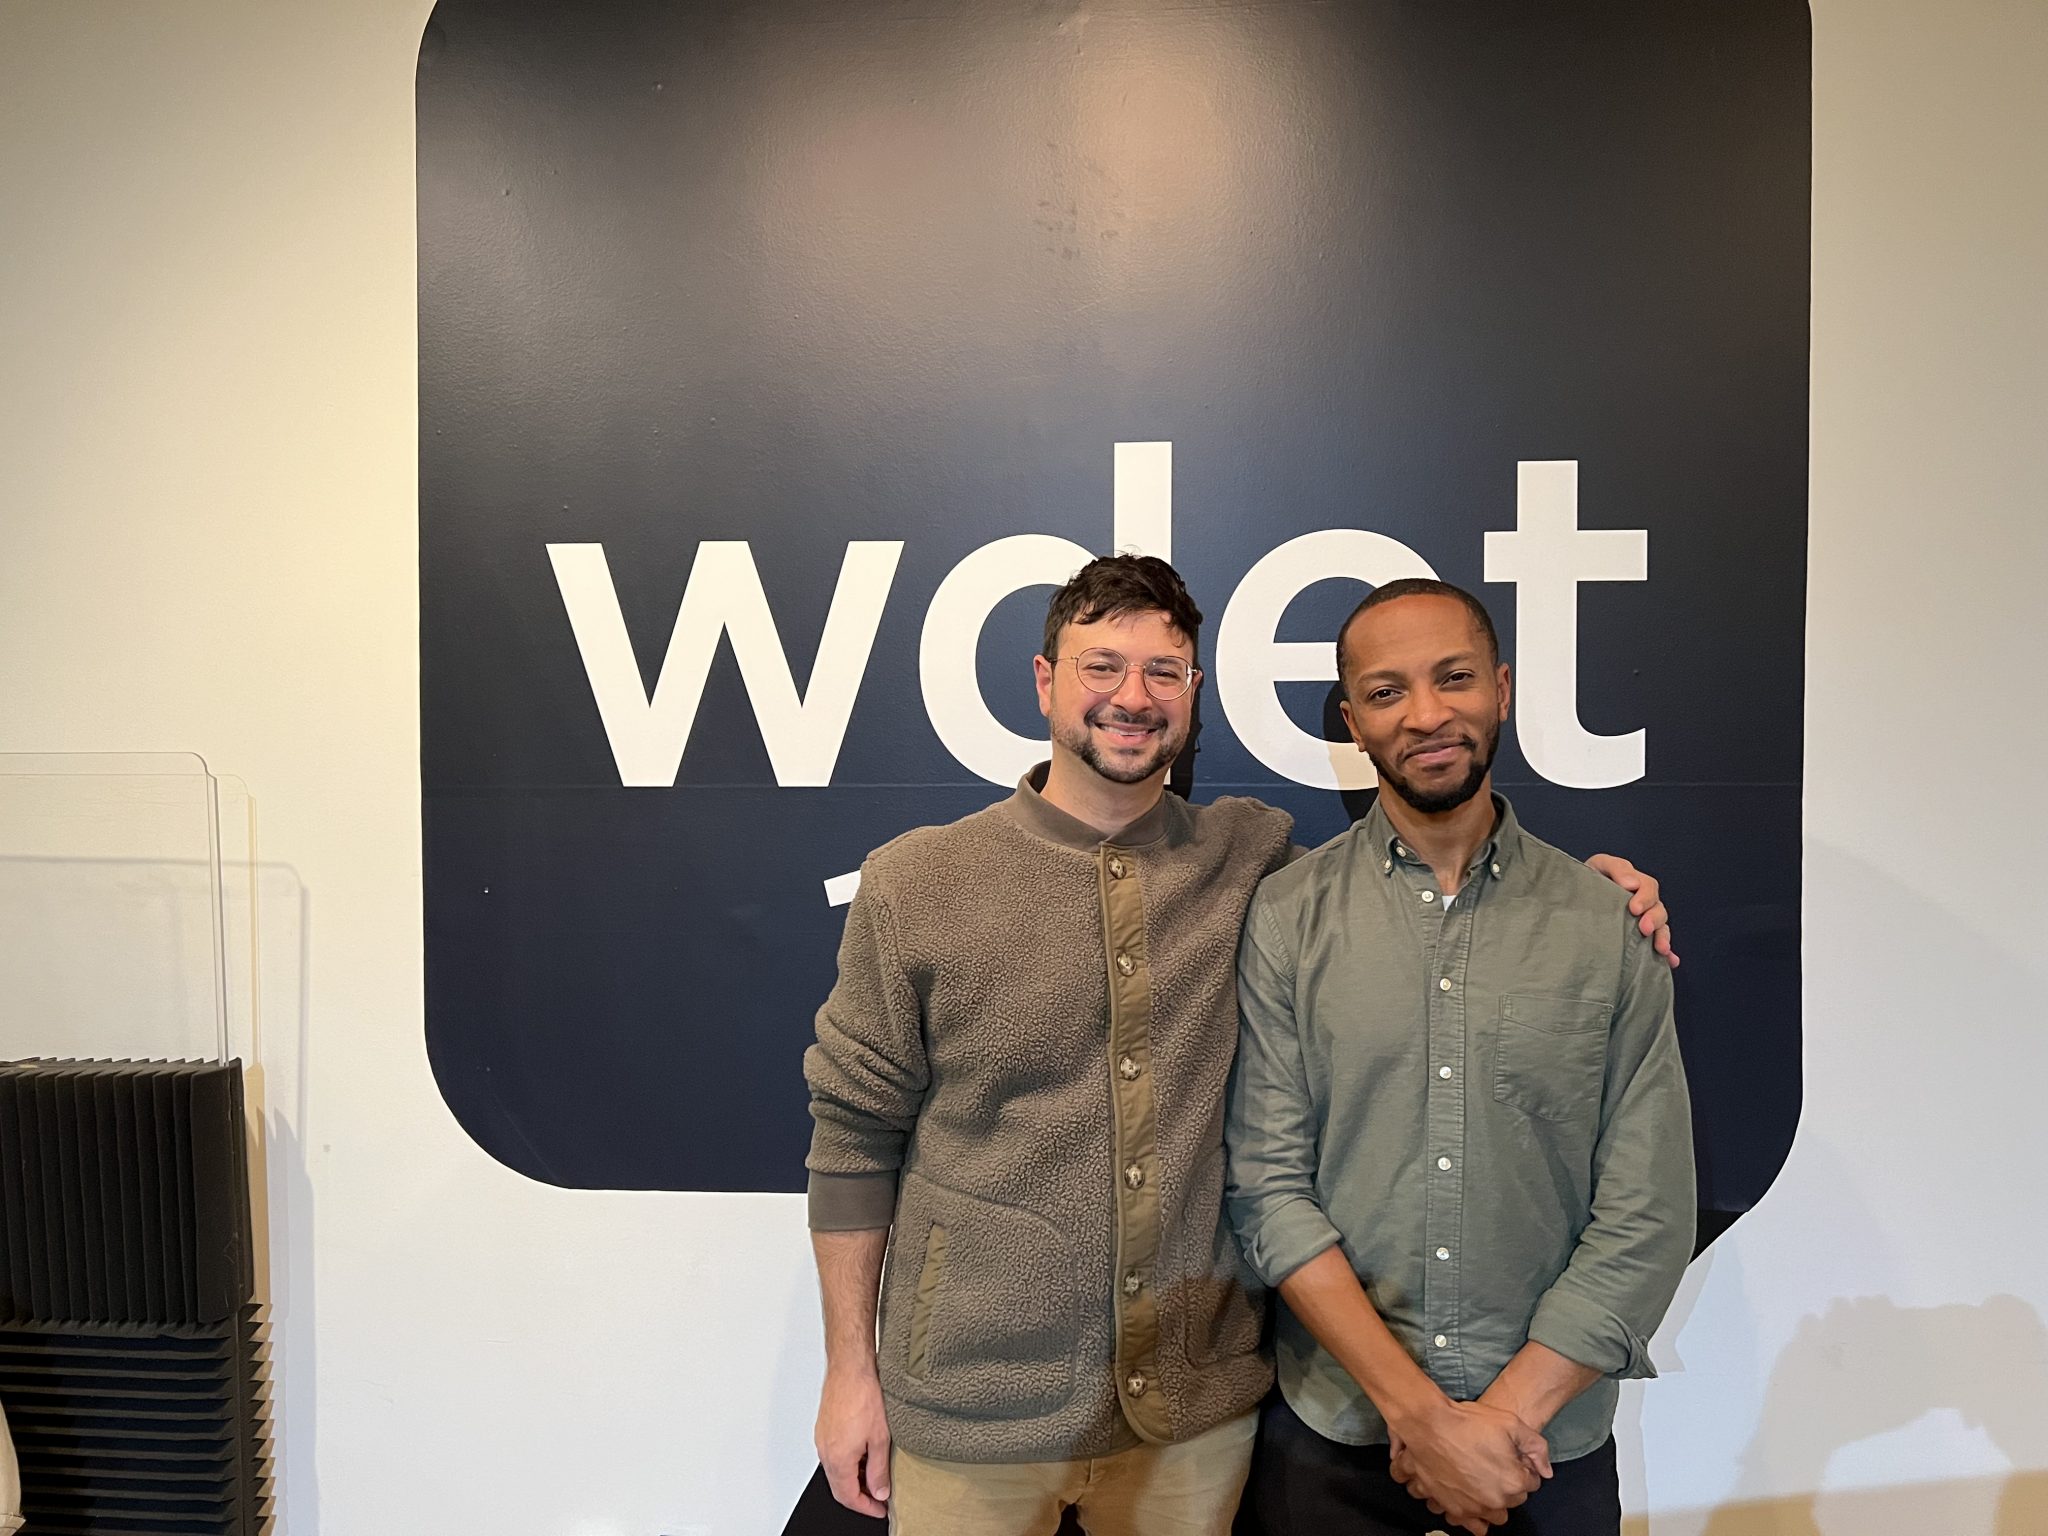 Michael Malis and Marcus Elliot smile in front of the WDET logo